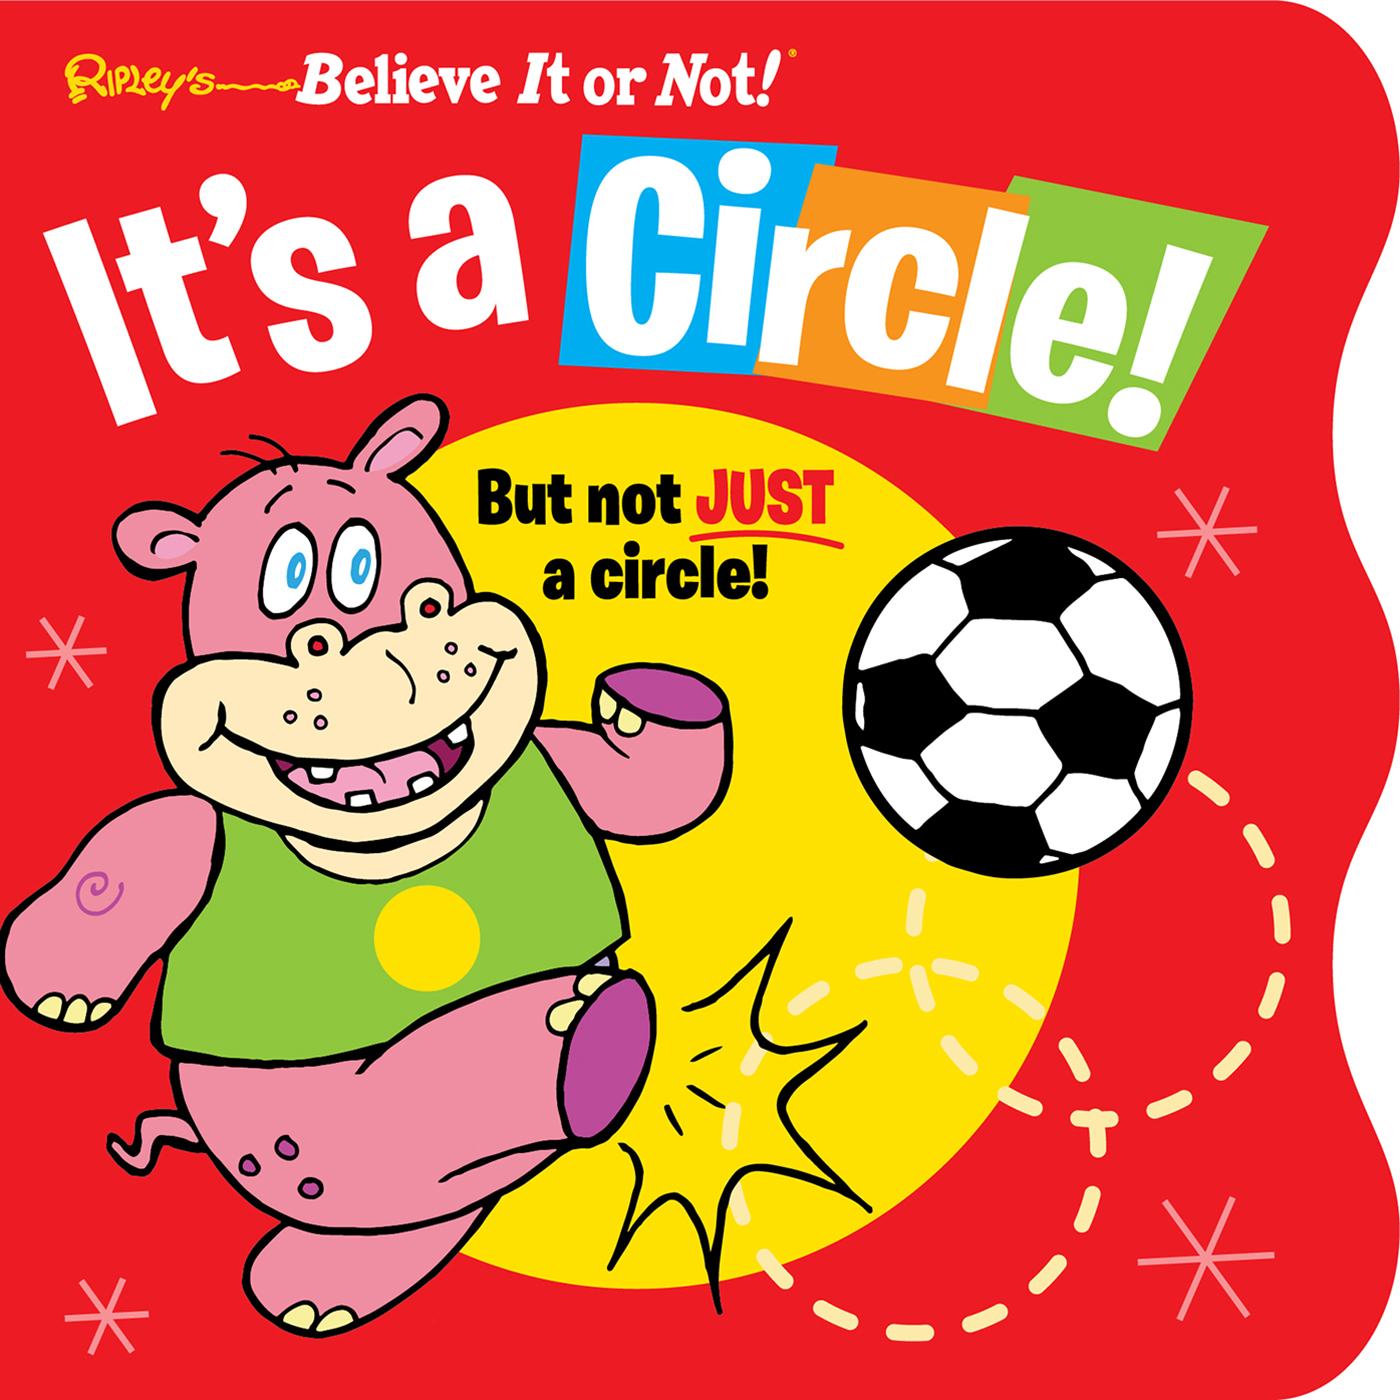 Ripley’s Believe It or Not! It’s a Circle: But Not Just a Circle!